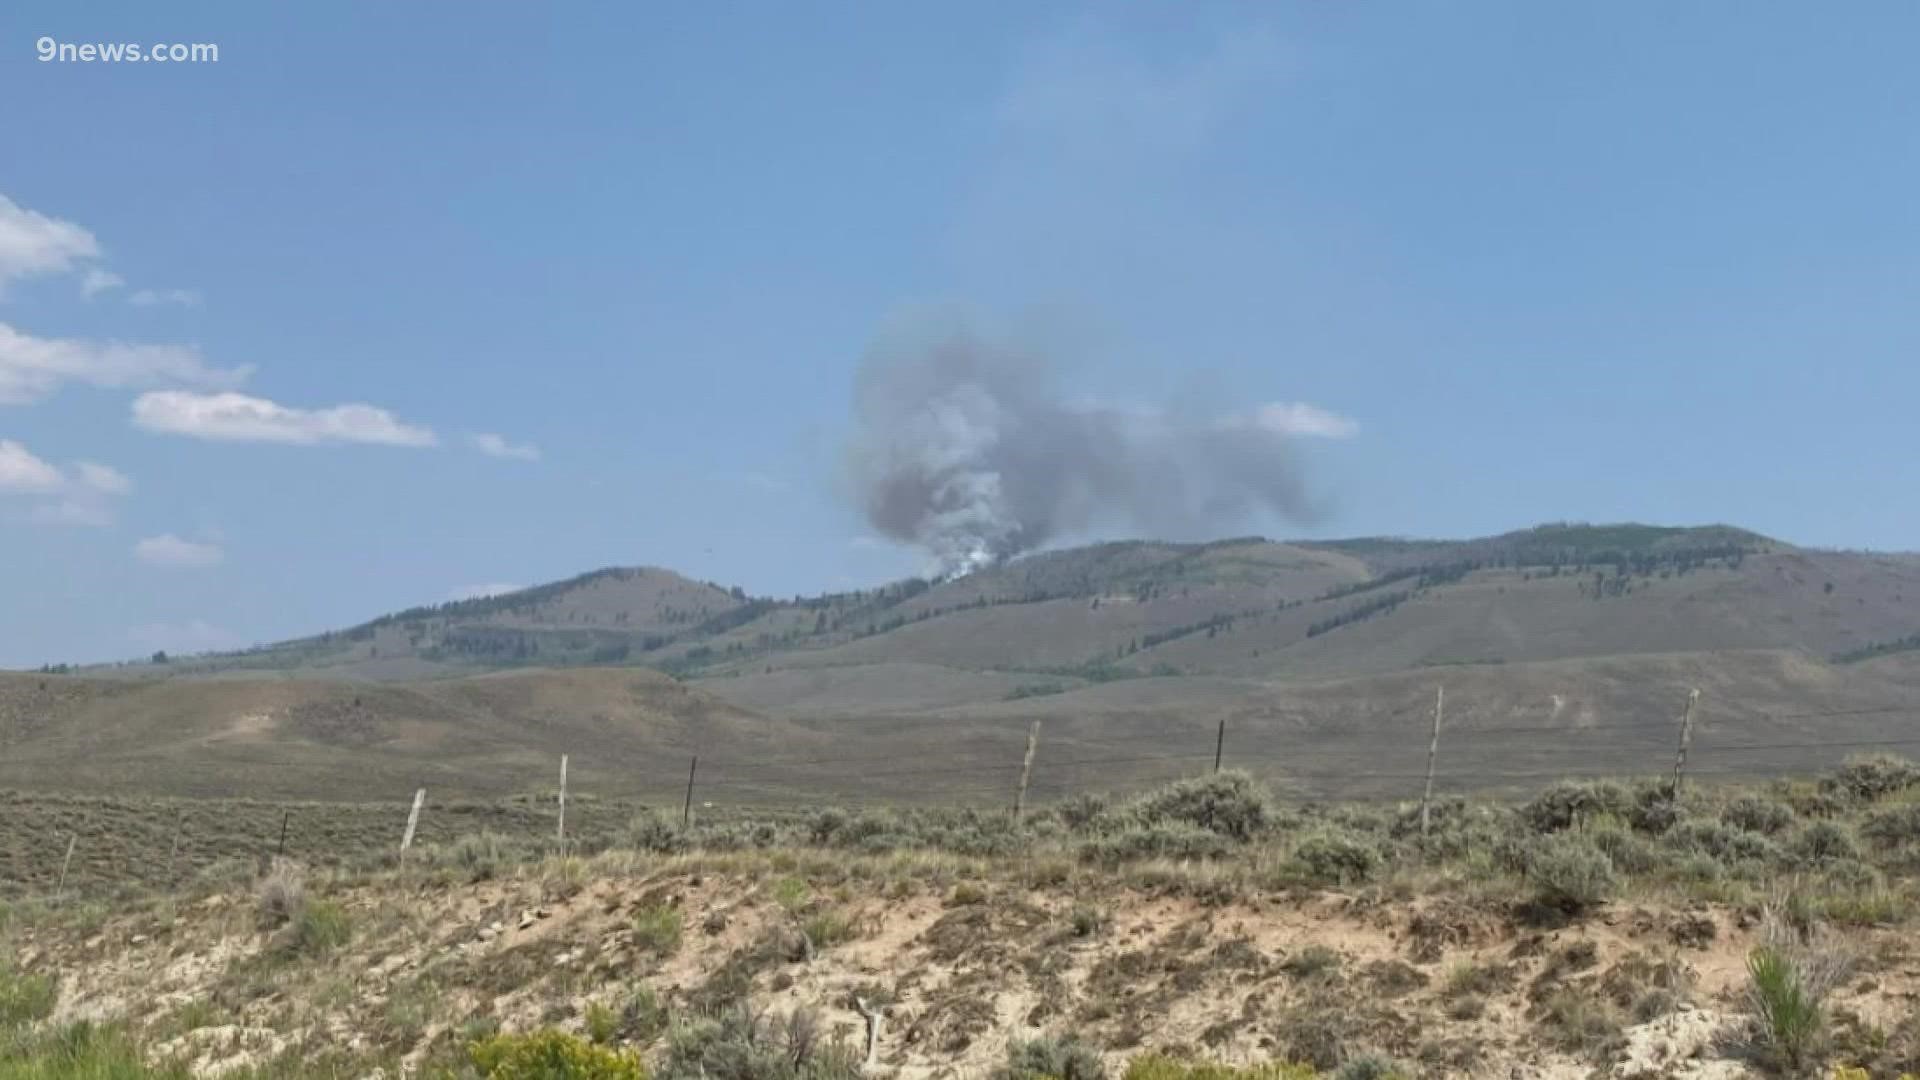 No evacuation orders have been made, and the fire is currently burning off County Road 2.